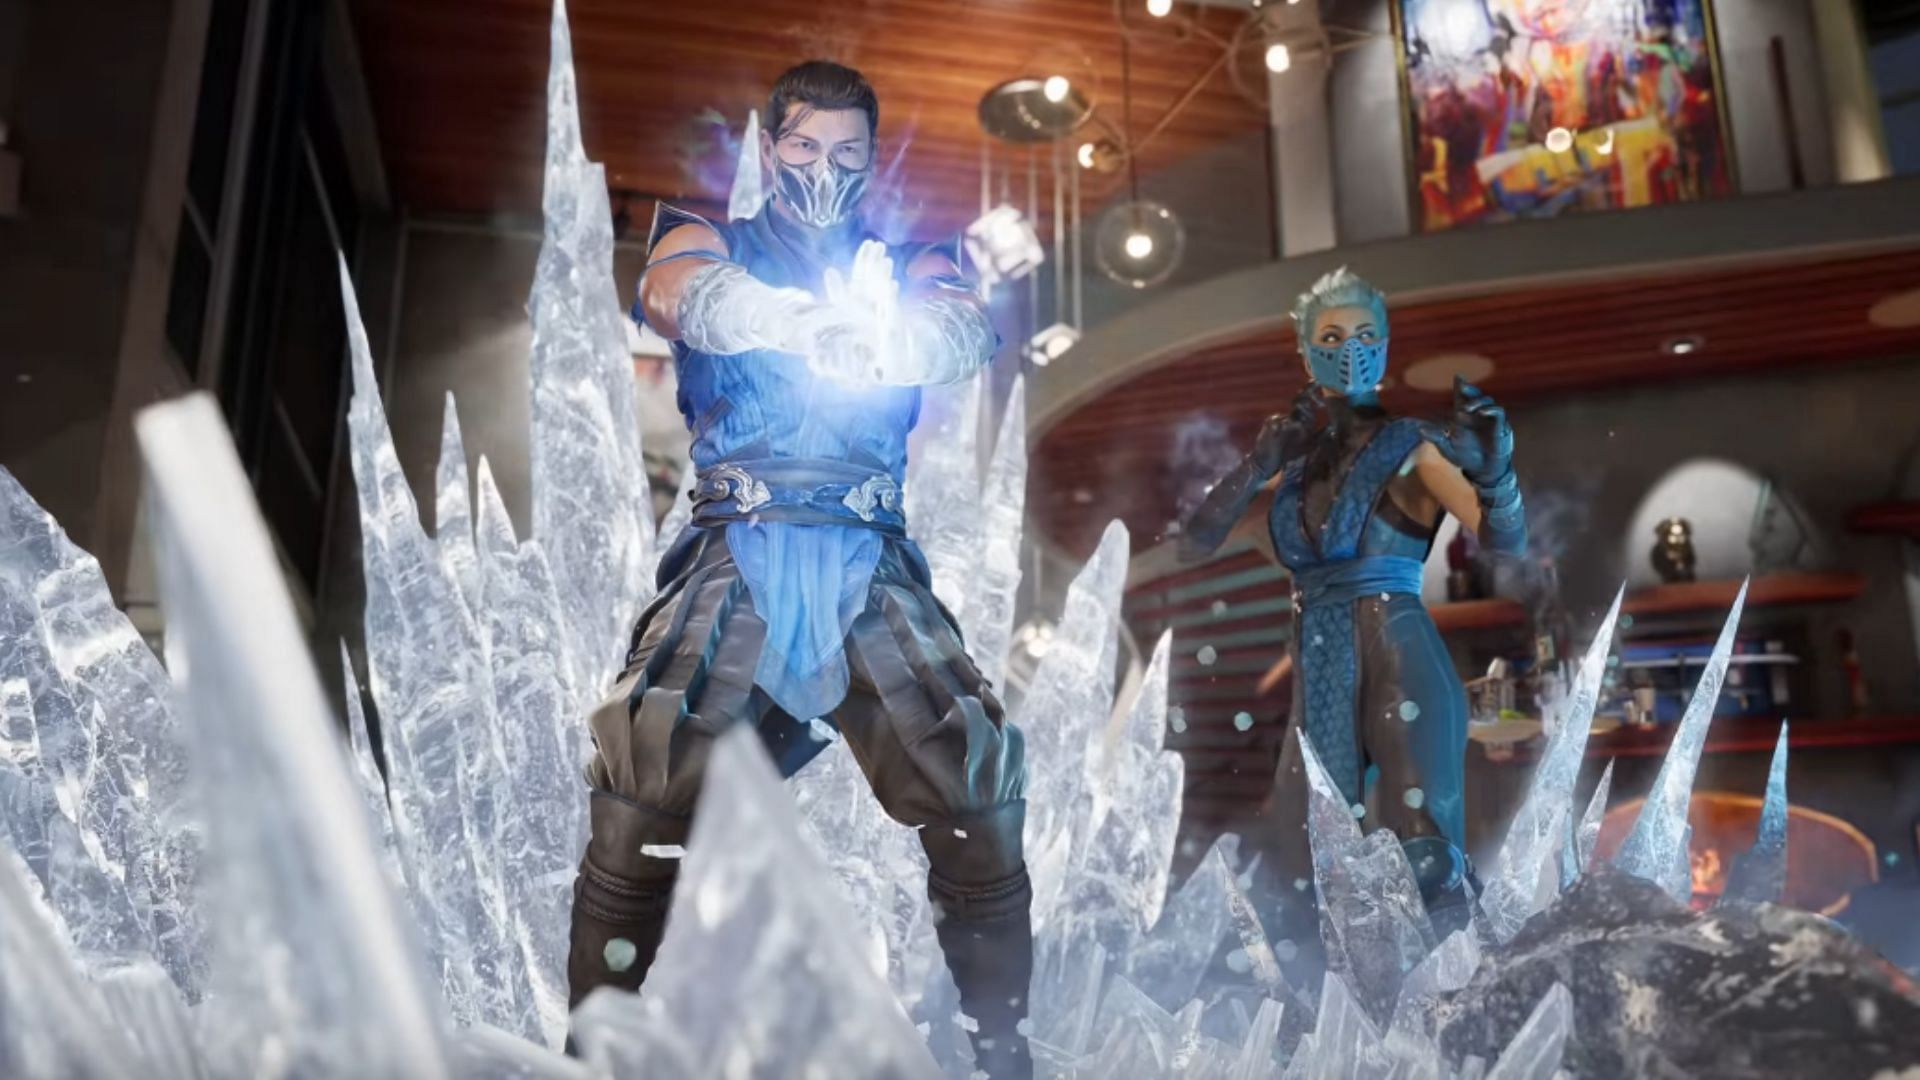 IGN on X: The full roster of fighters in Mortal Kombat 1 will